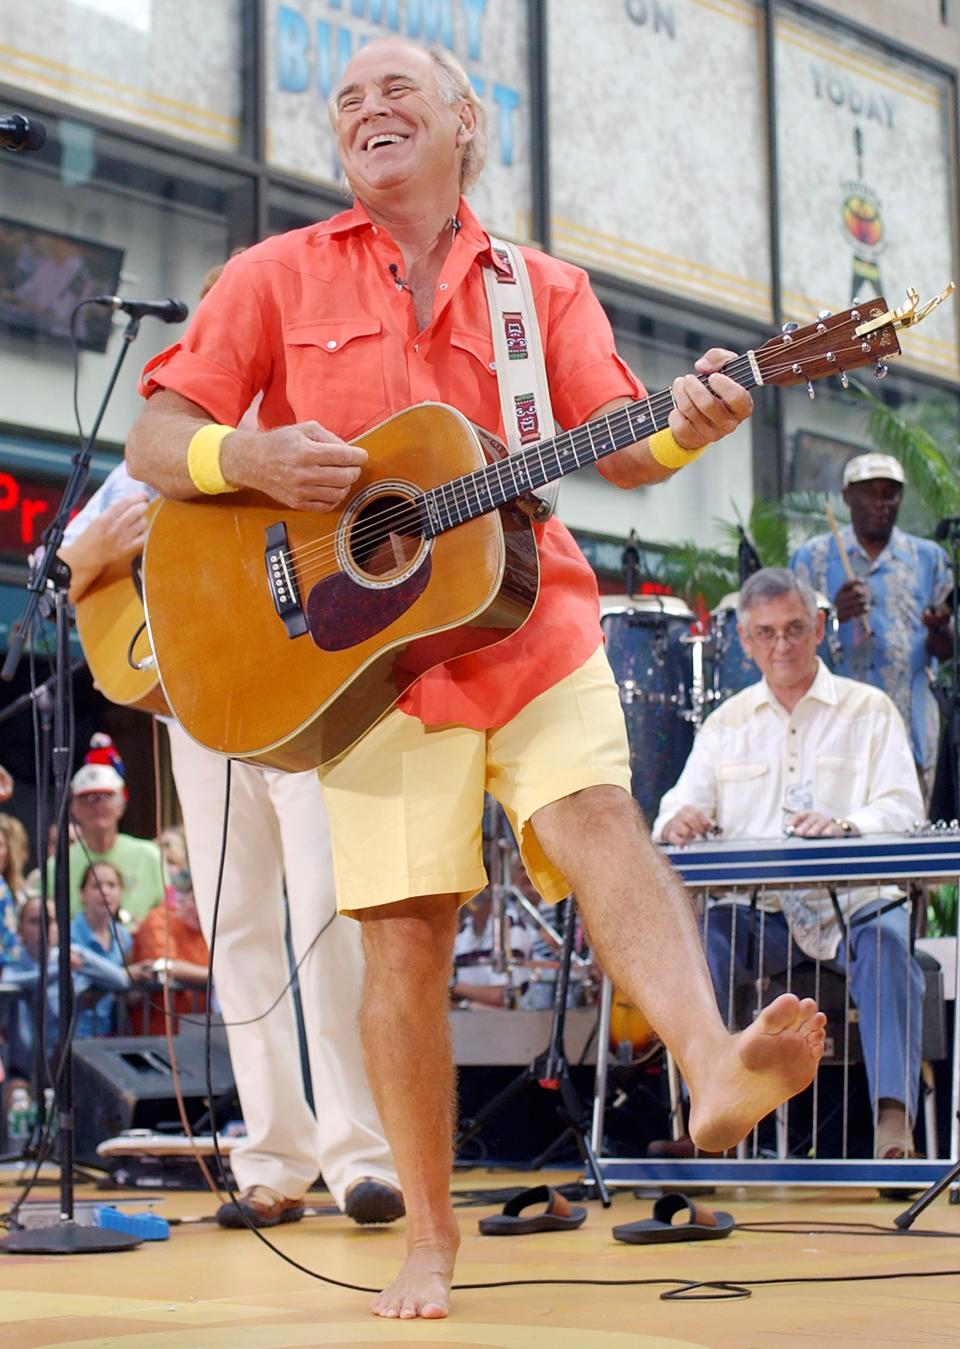 Singer Jimmy Buffet performs barefooted with his band The Coral Reefers on the NBC "Today" television show summer concert series in New York's Rockefeller Plaza, on June 25, 2004. “Margaritaville” singer-songwriter Jimmy Buffett has died at age 76.